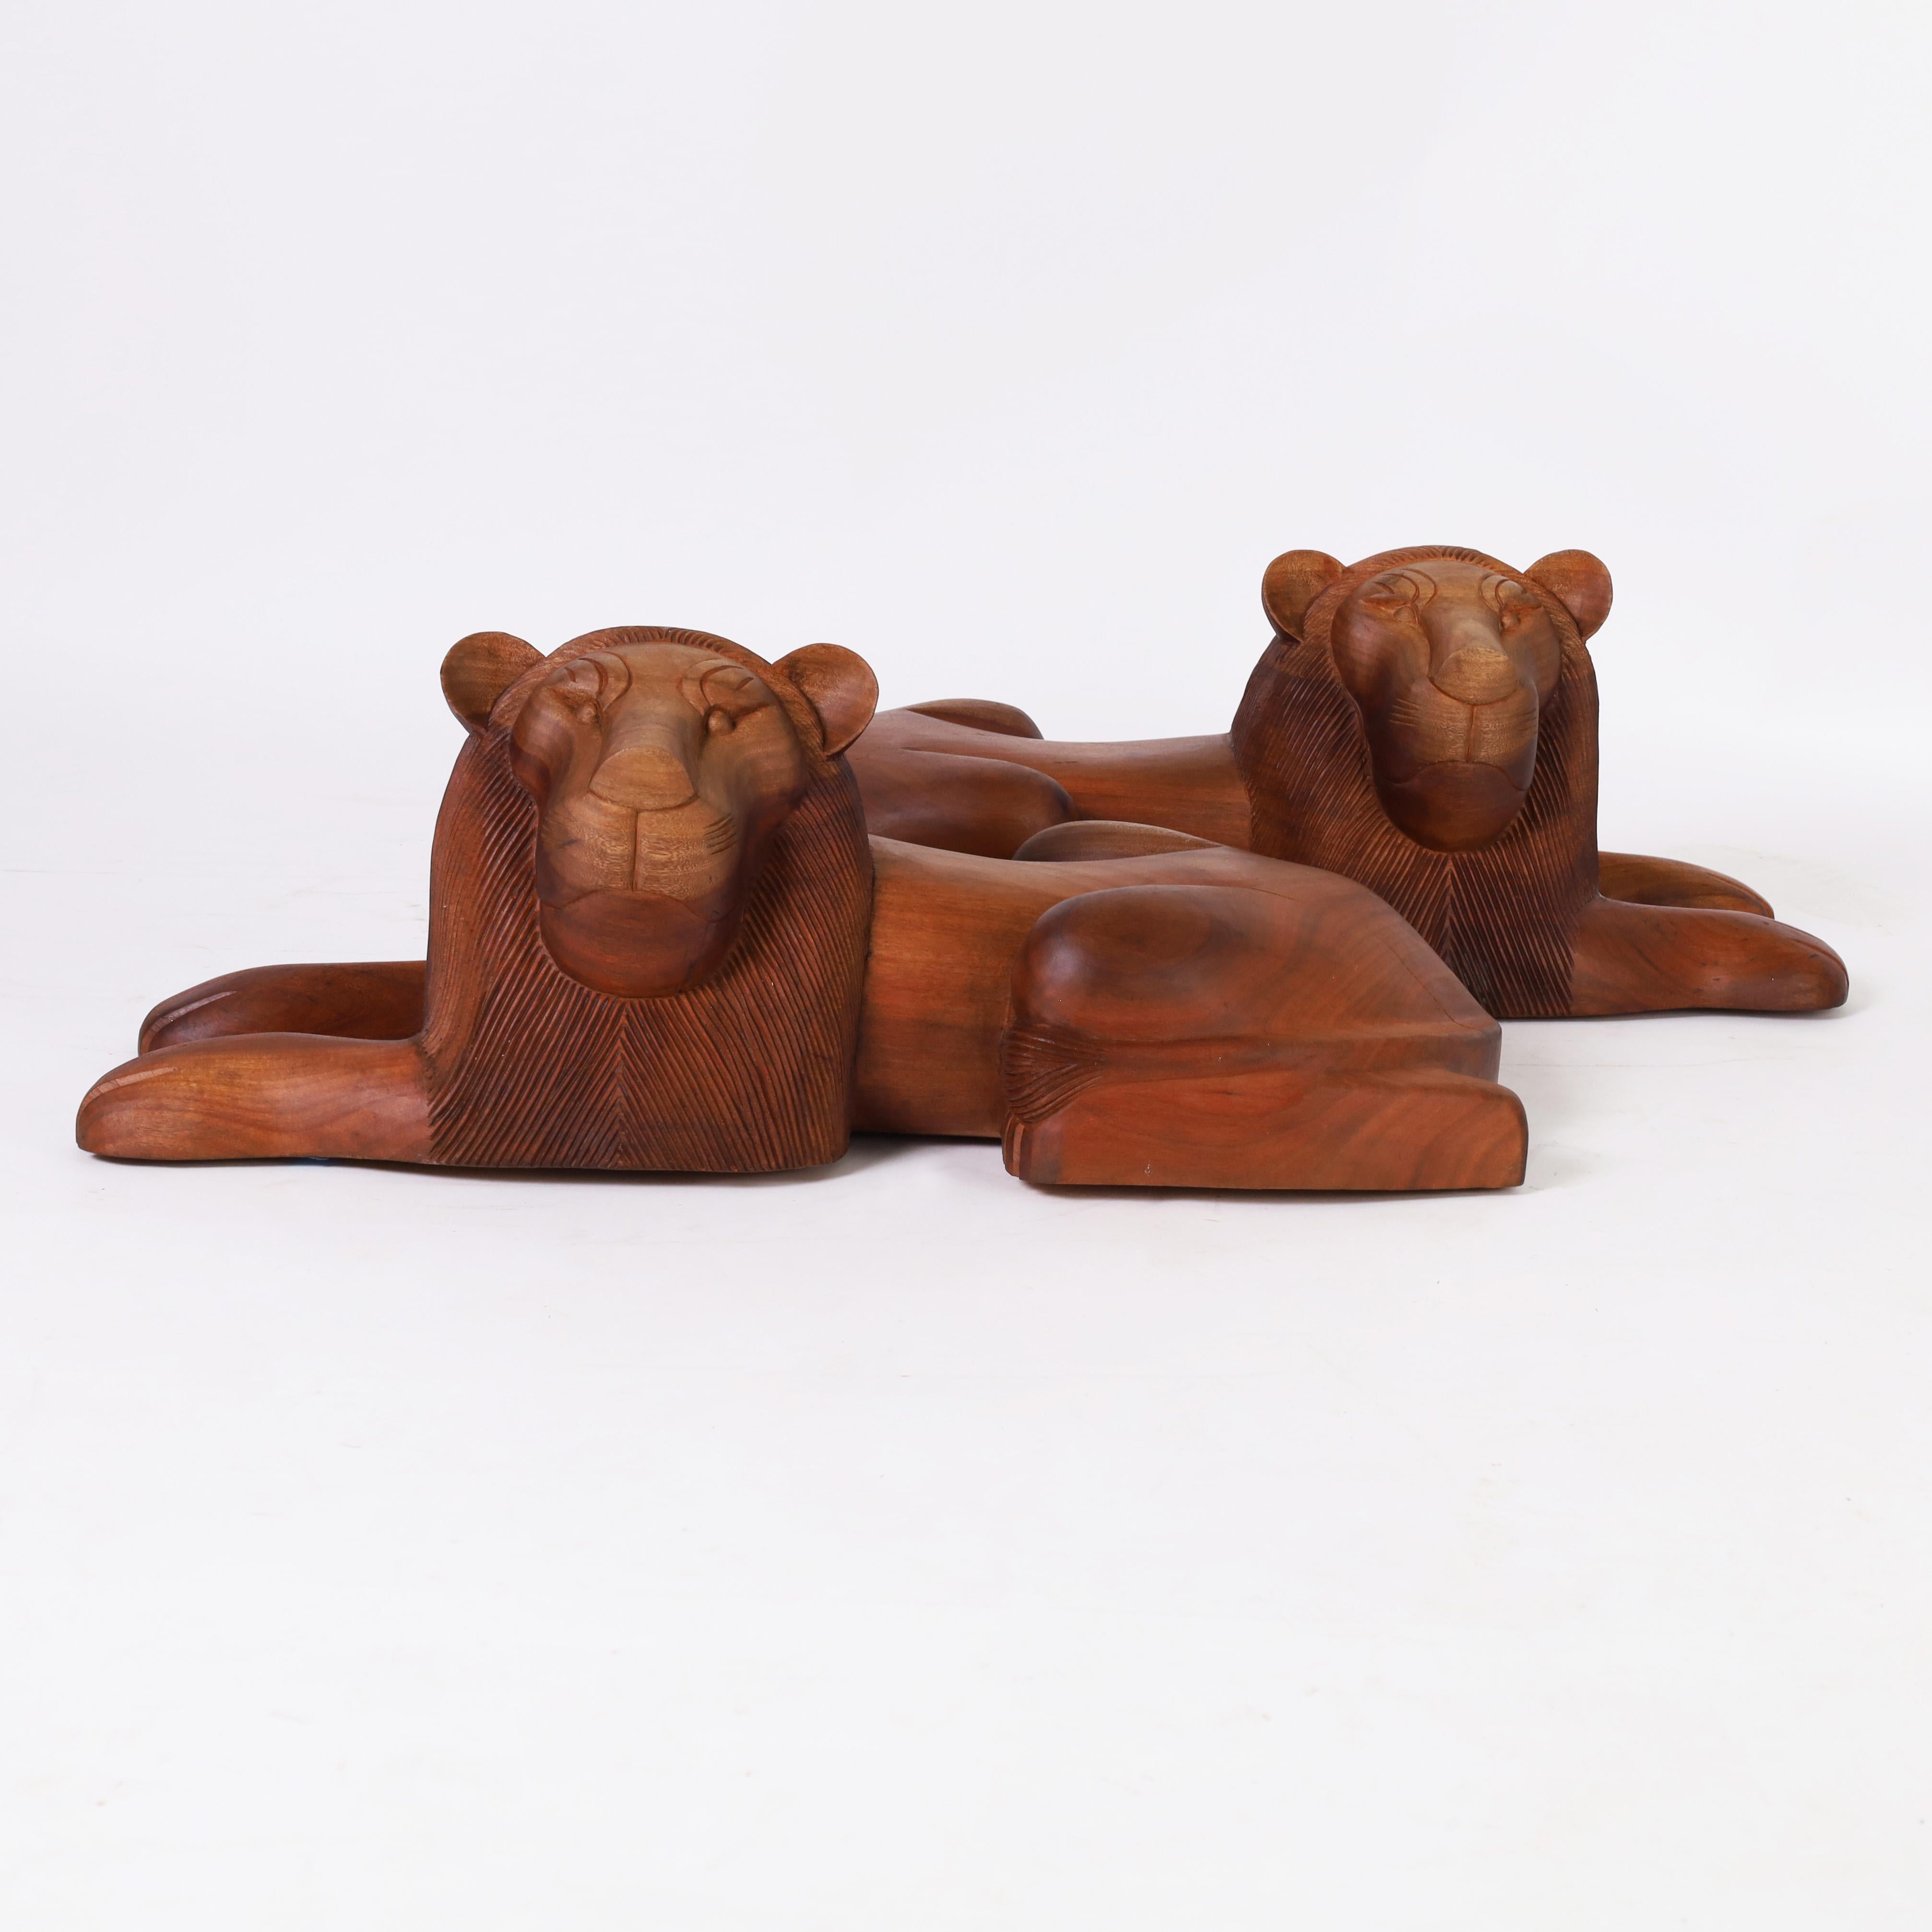 Pair of Carved Wood Lions from Minas Gerais - Sculpture by Unknown